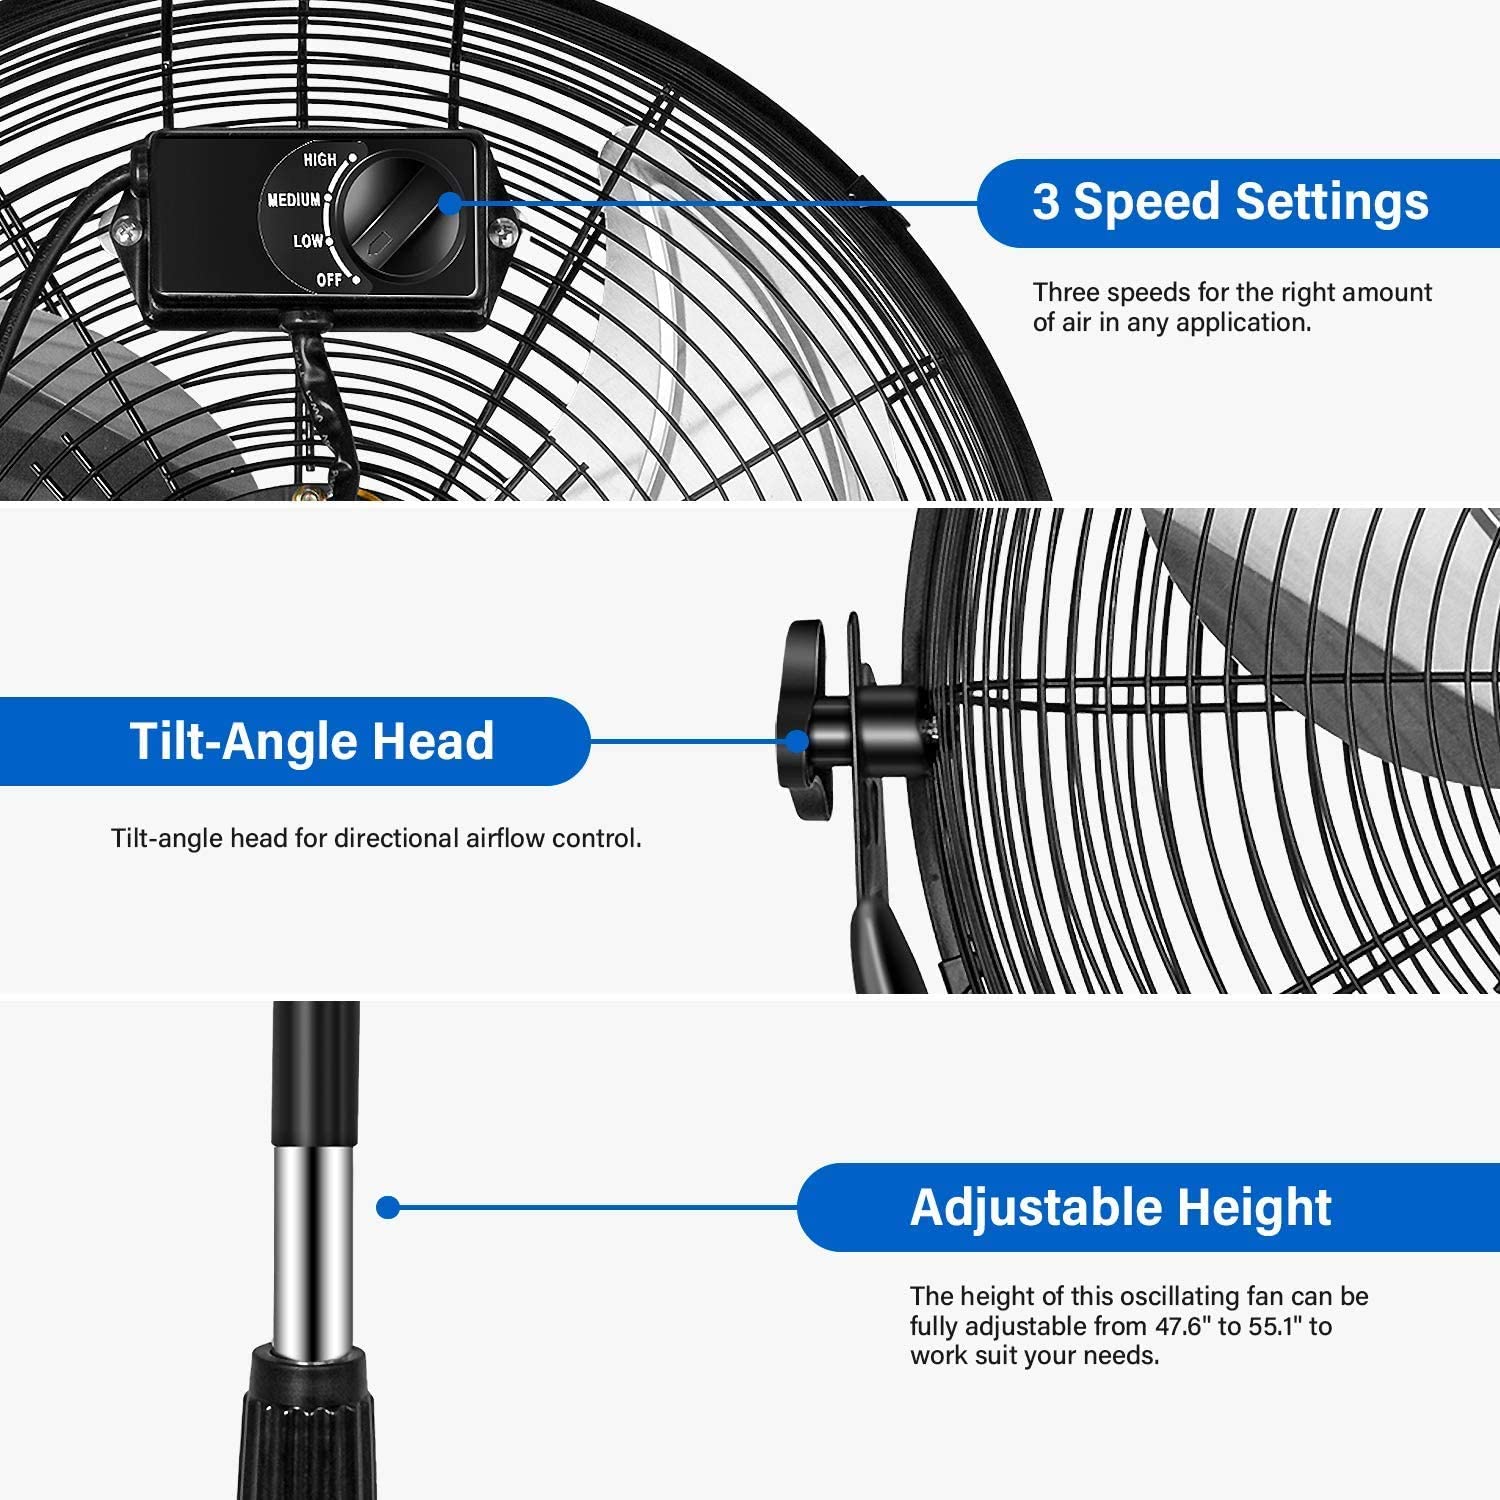 ZNTS Simple Deluxe 20 Inch Pedestal Standing Fan, High Velocity, Heavy Duty Metal For Industrial, HIFANXSTAND20